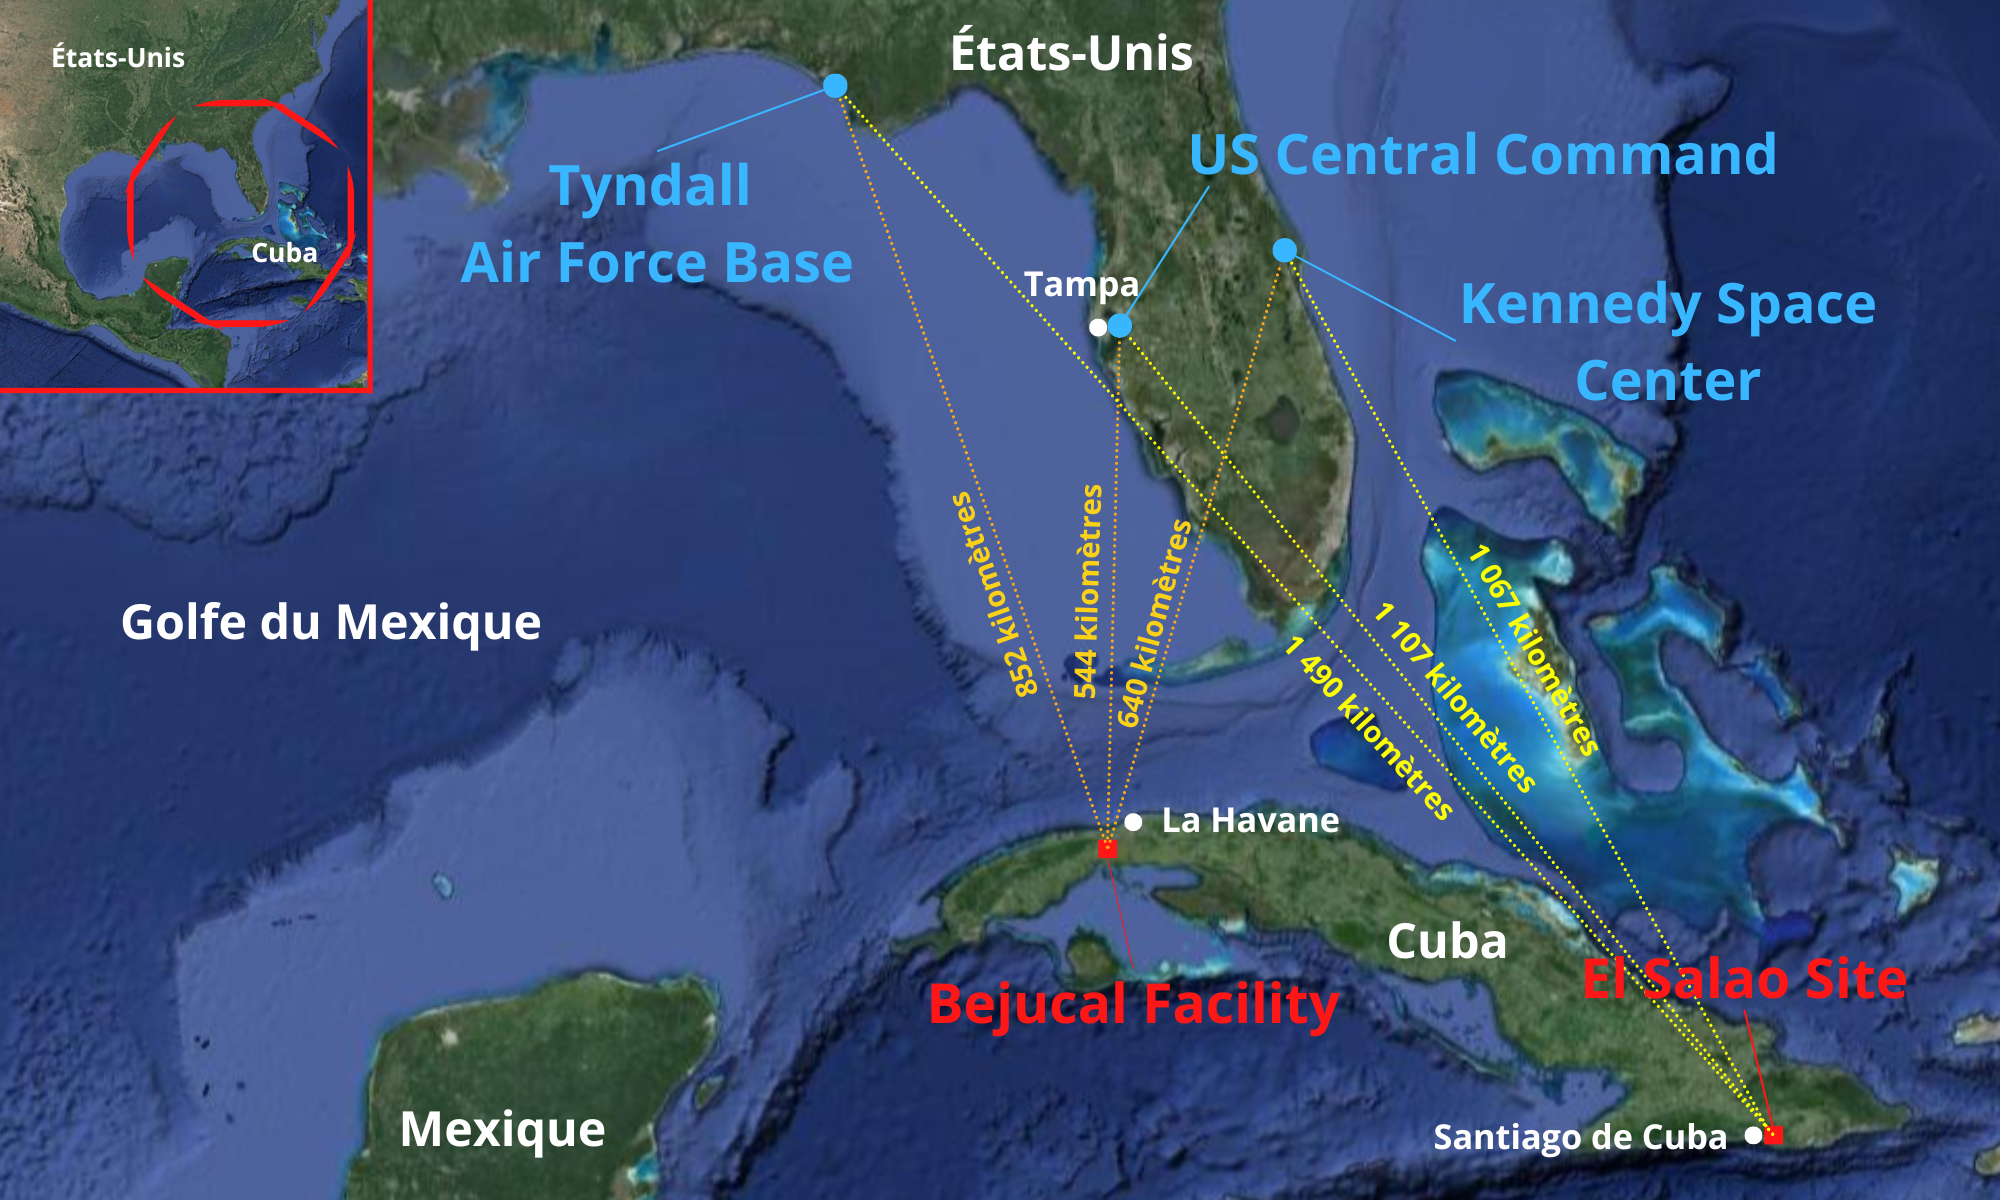 Cuba is located near several strategic U.S. sites, an ideal position for gathering intelligence.